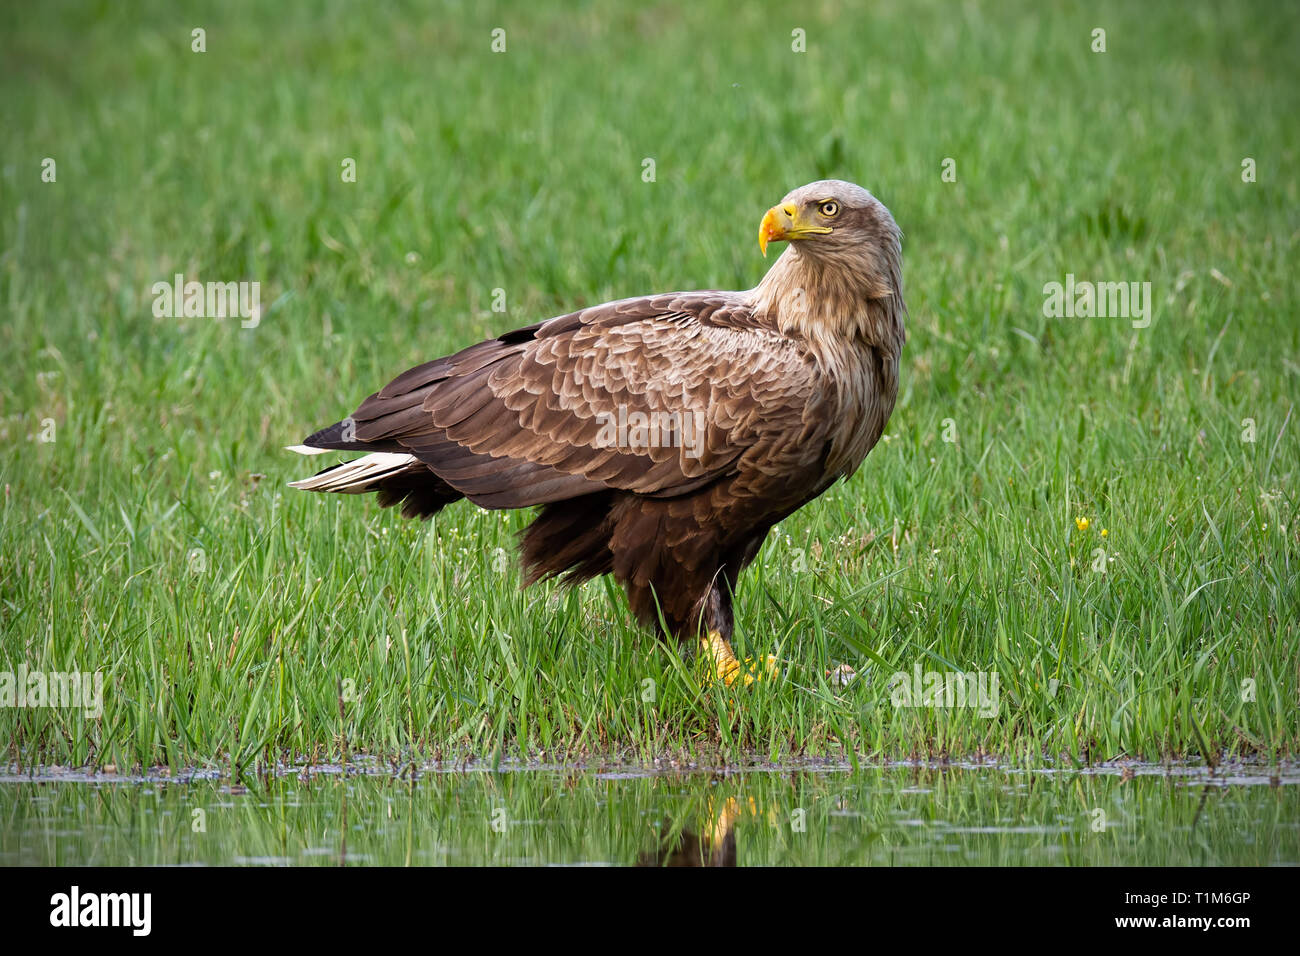 Adult white-tailed eagle, haliaeetus albicilla, in summer sitting on a bank. Erne with big yellow beak near water. Wildlife scnery from nature. Stock Photo